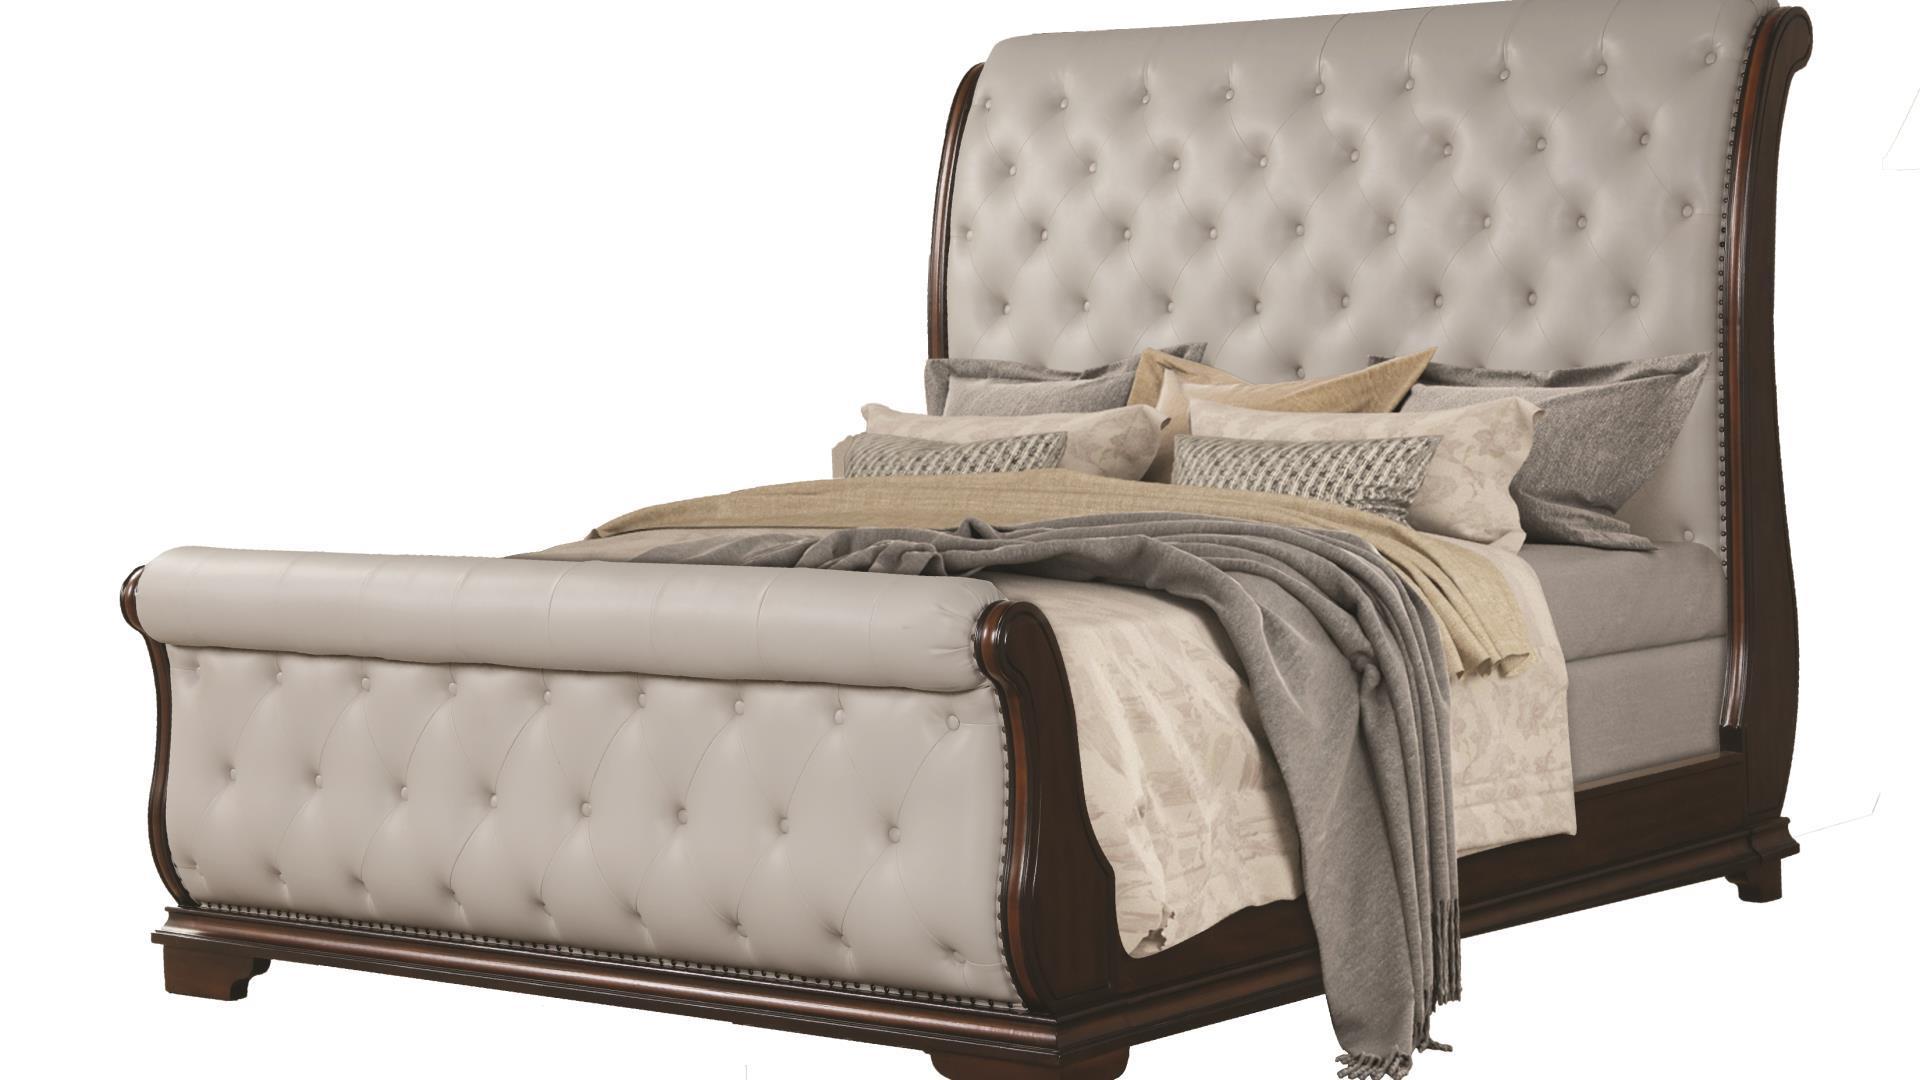 

    
White Tufted Sleigh Queen Bedroom Set 4P MONTAGE Galaxy Home Traditional Classic
